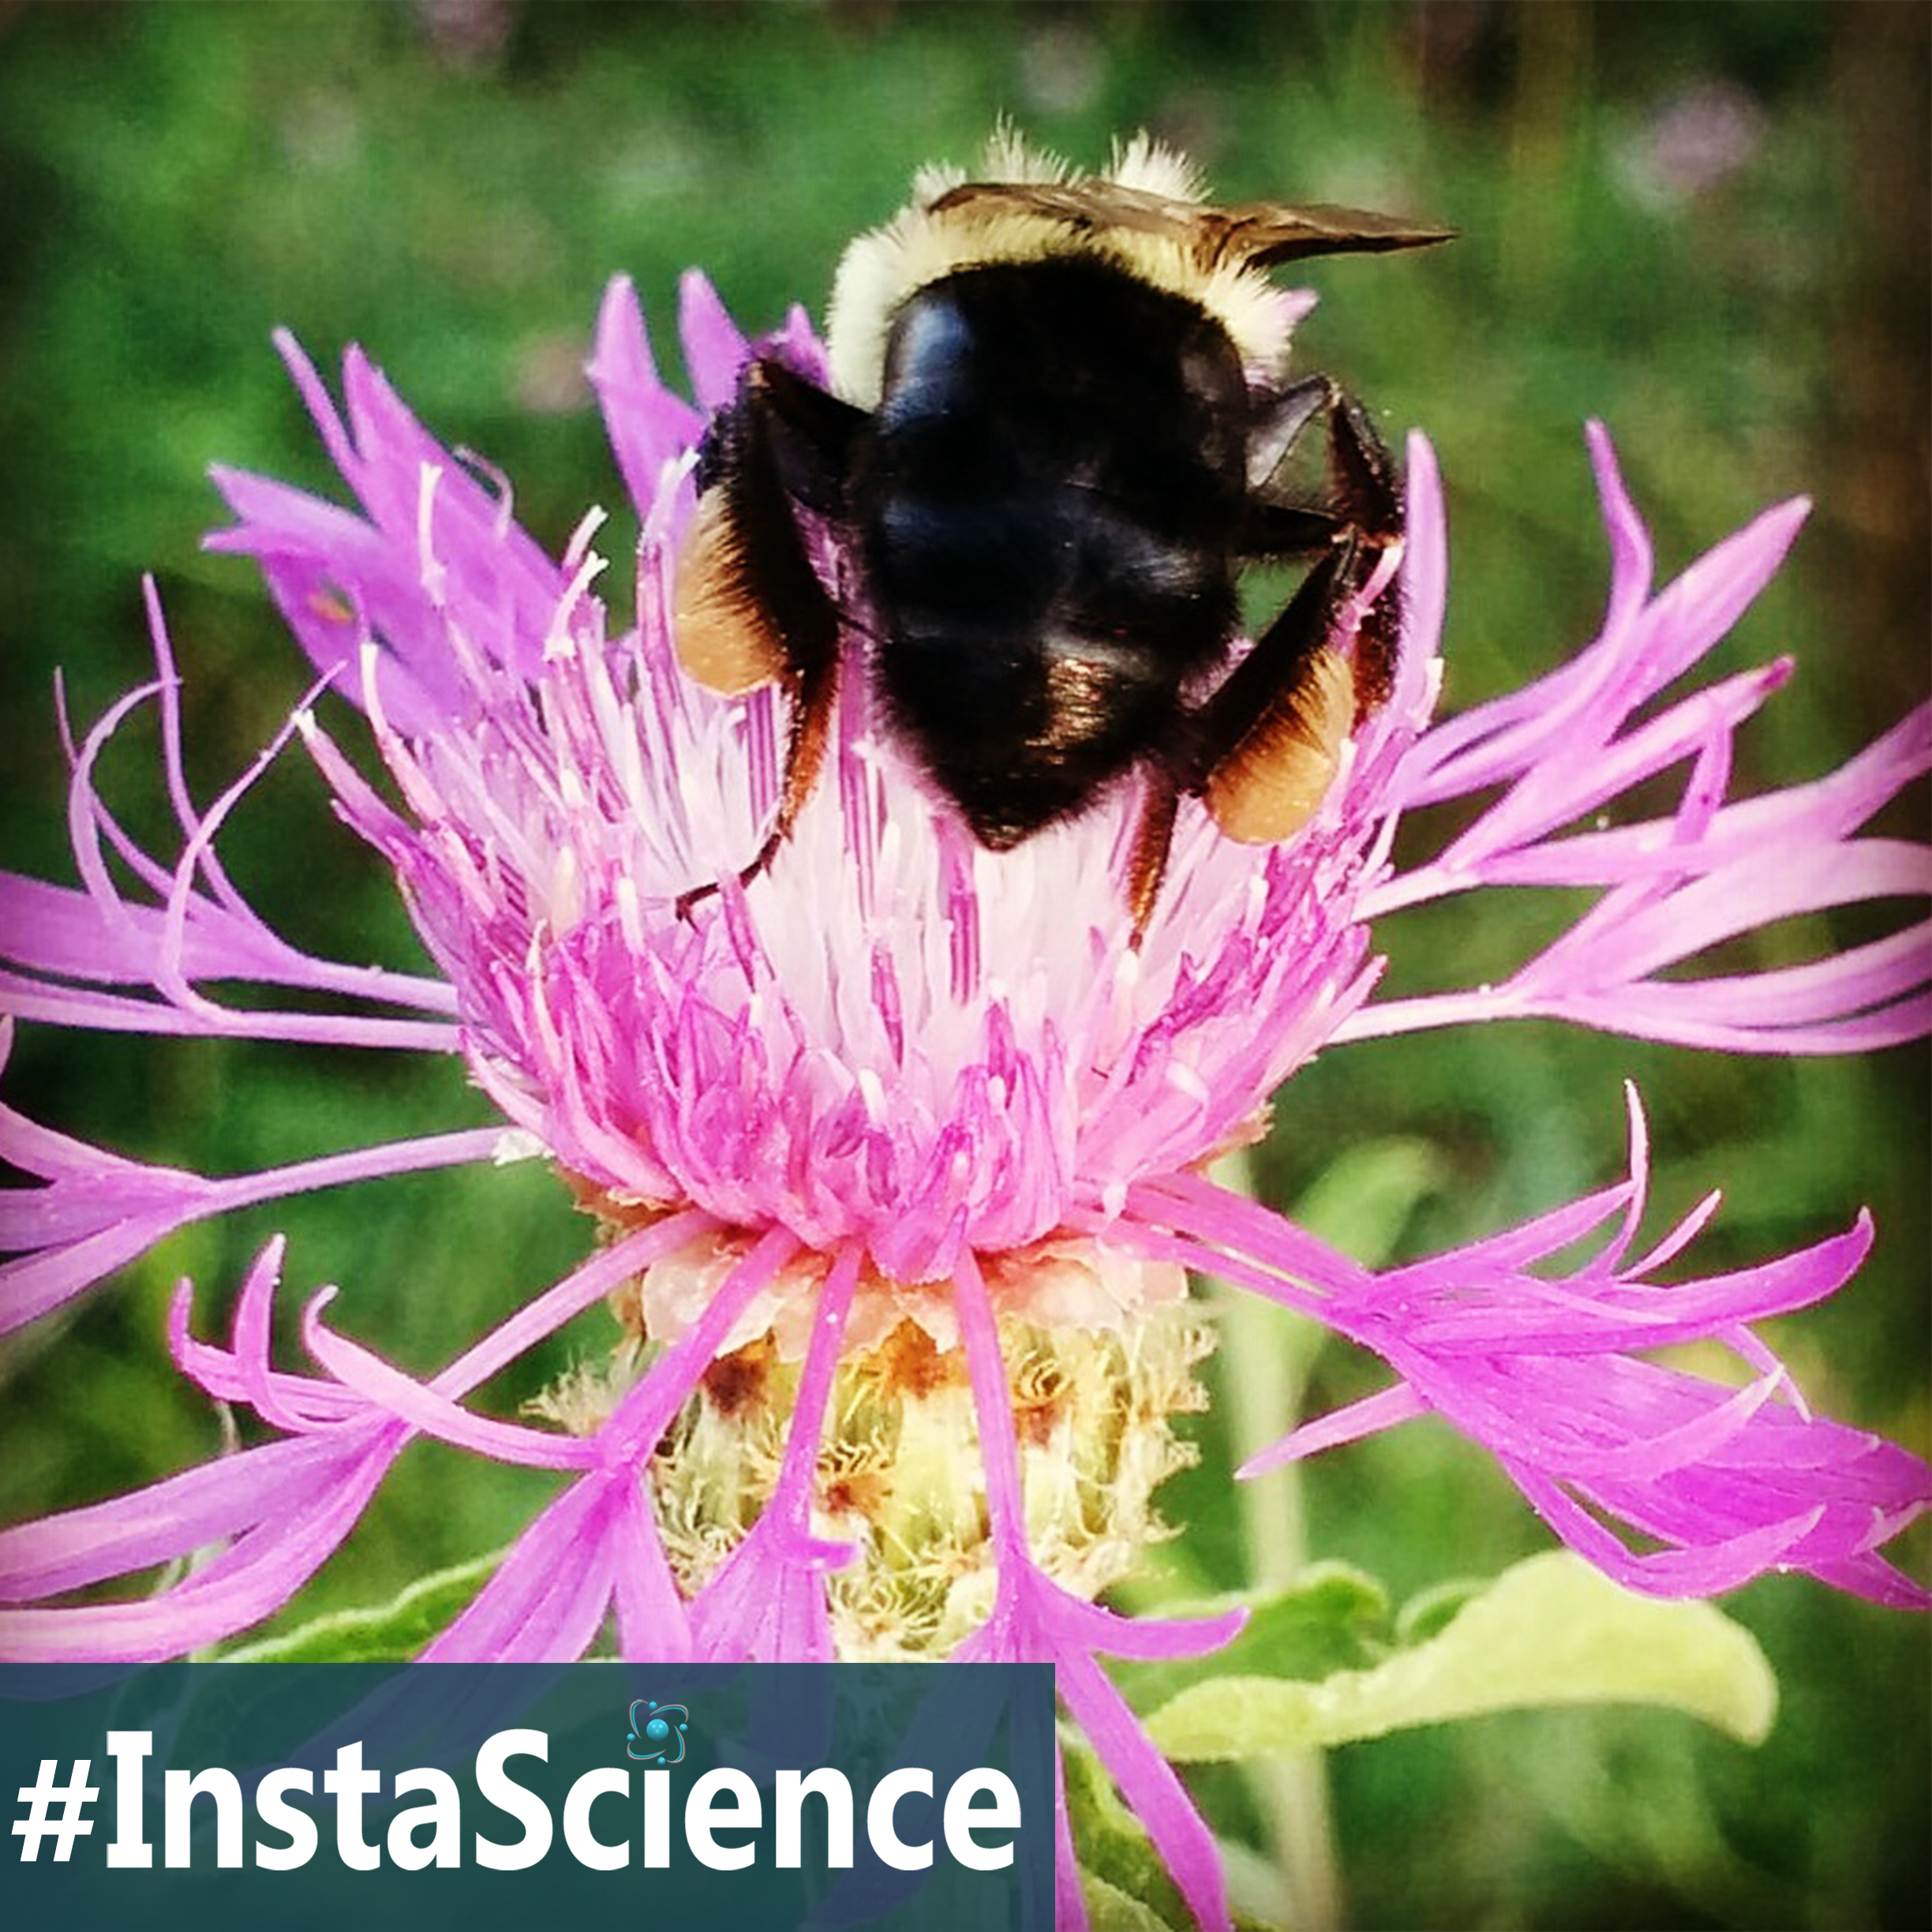 Check out the legs on this bee - is it from his awesome muscles or from pollen? Click on over to see facts, videos, and more!